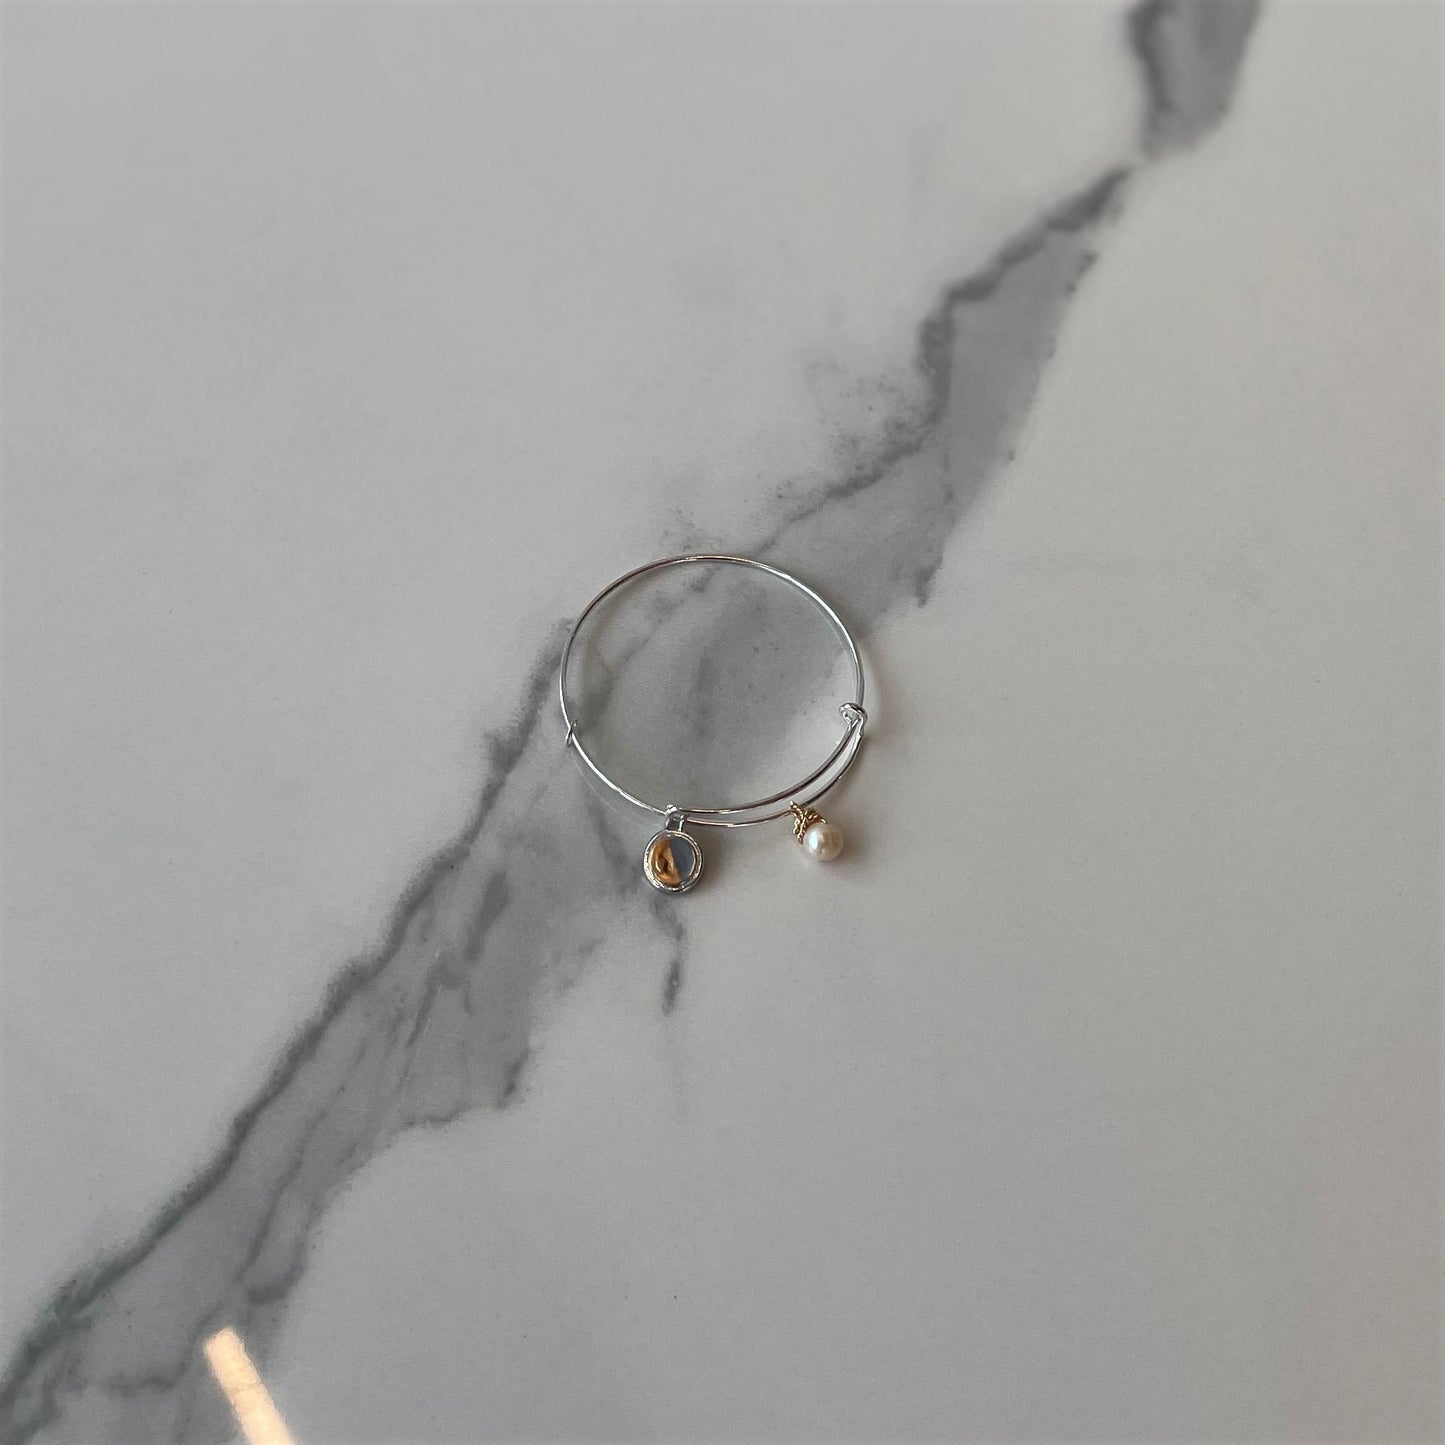 Bangle with pearl and concrete charms